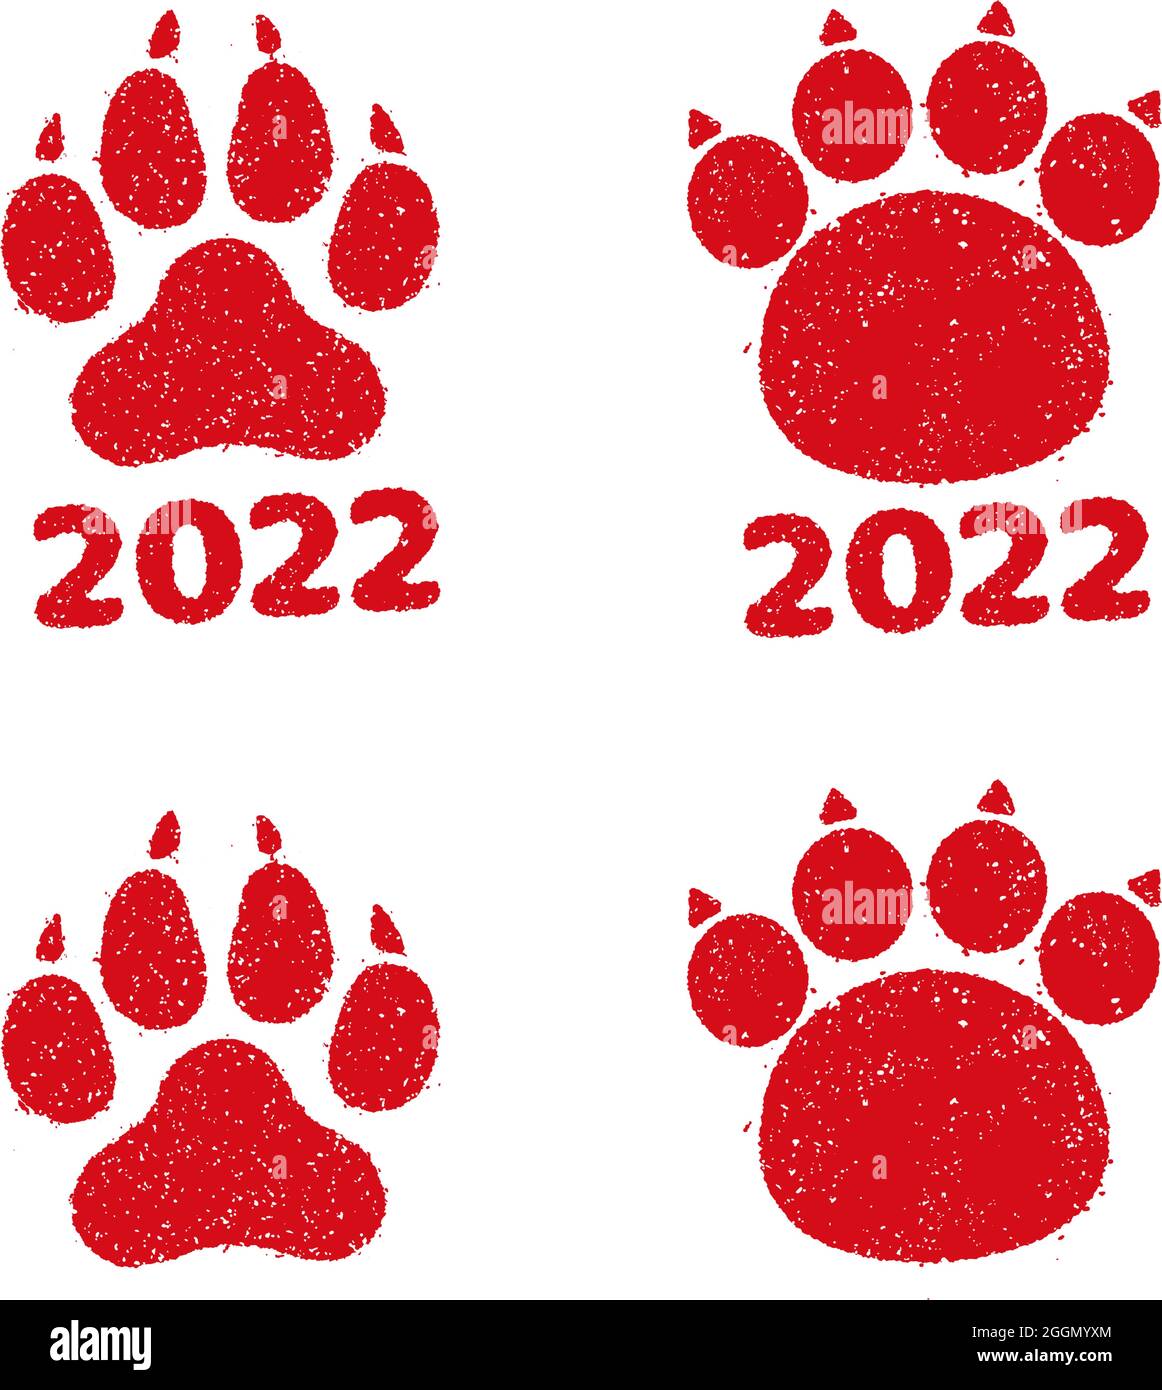 Tiger footprints stamp illustration set for new year’s greeting card in 2022 Stock Vector